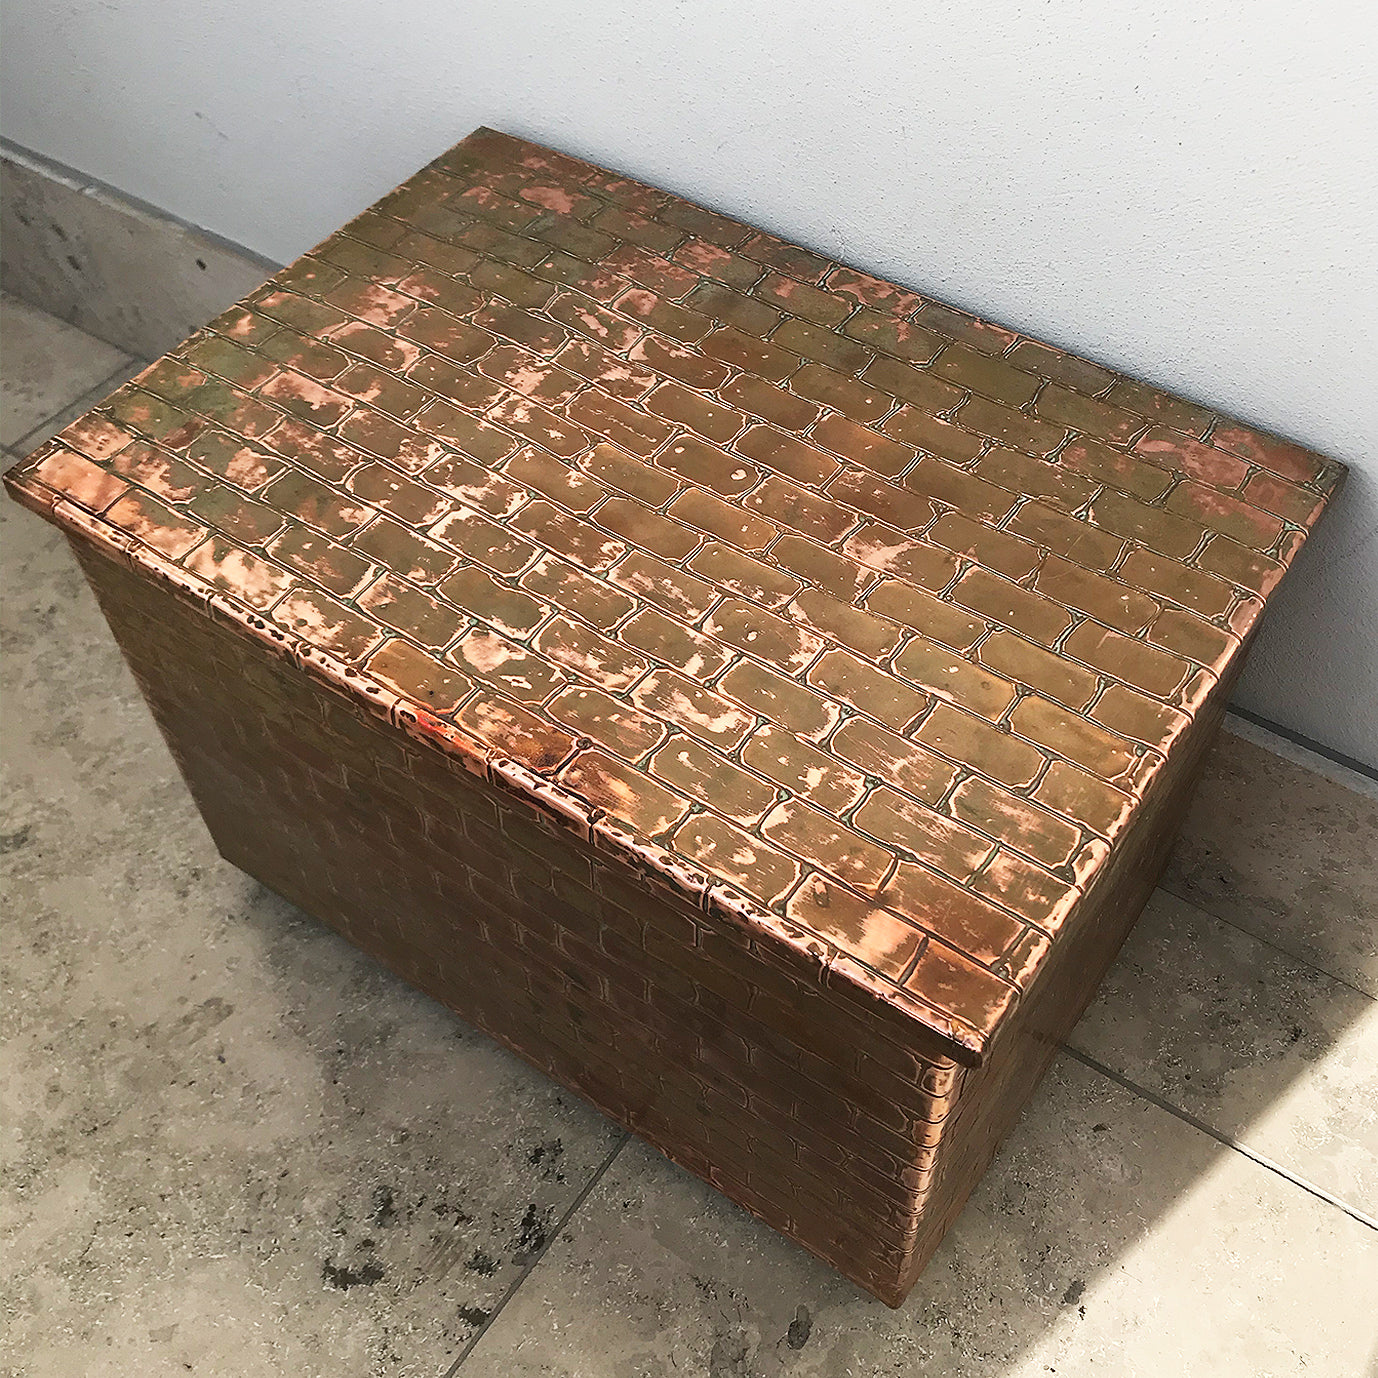 Stylish useful Vintage Copper trunk. It has a brick like pattern and a great patina - SHOP NOW - www.intovintage.co.uk